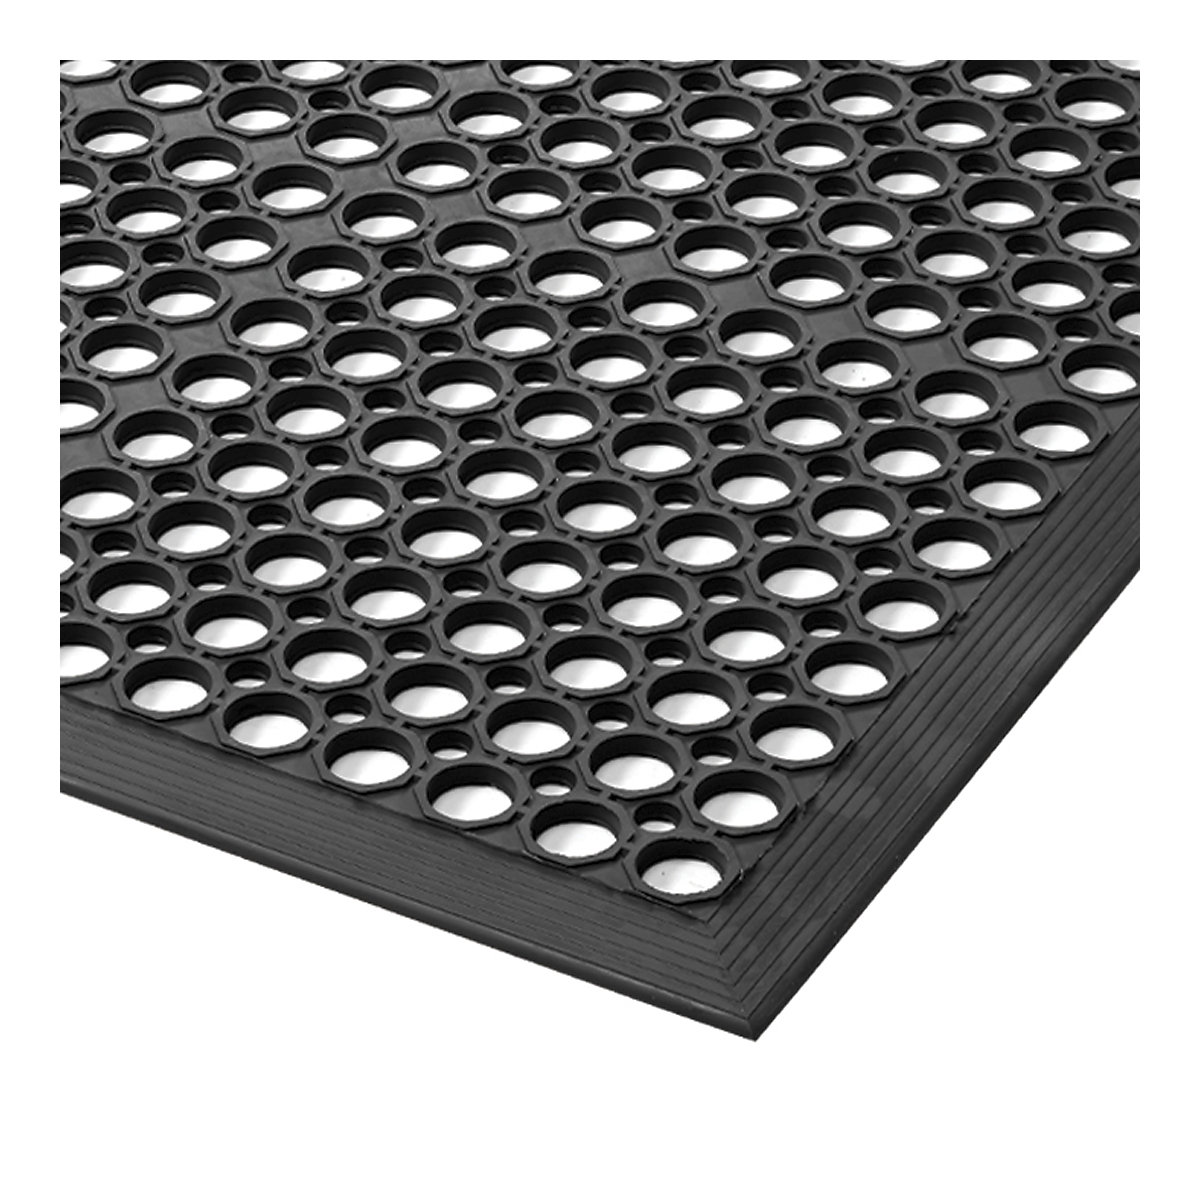 Sanitop perforated workstation matting - NOTRAX